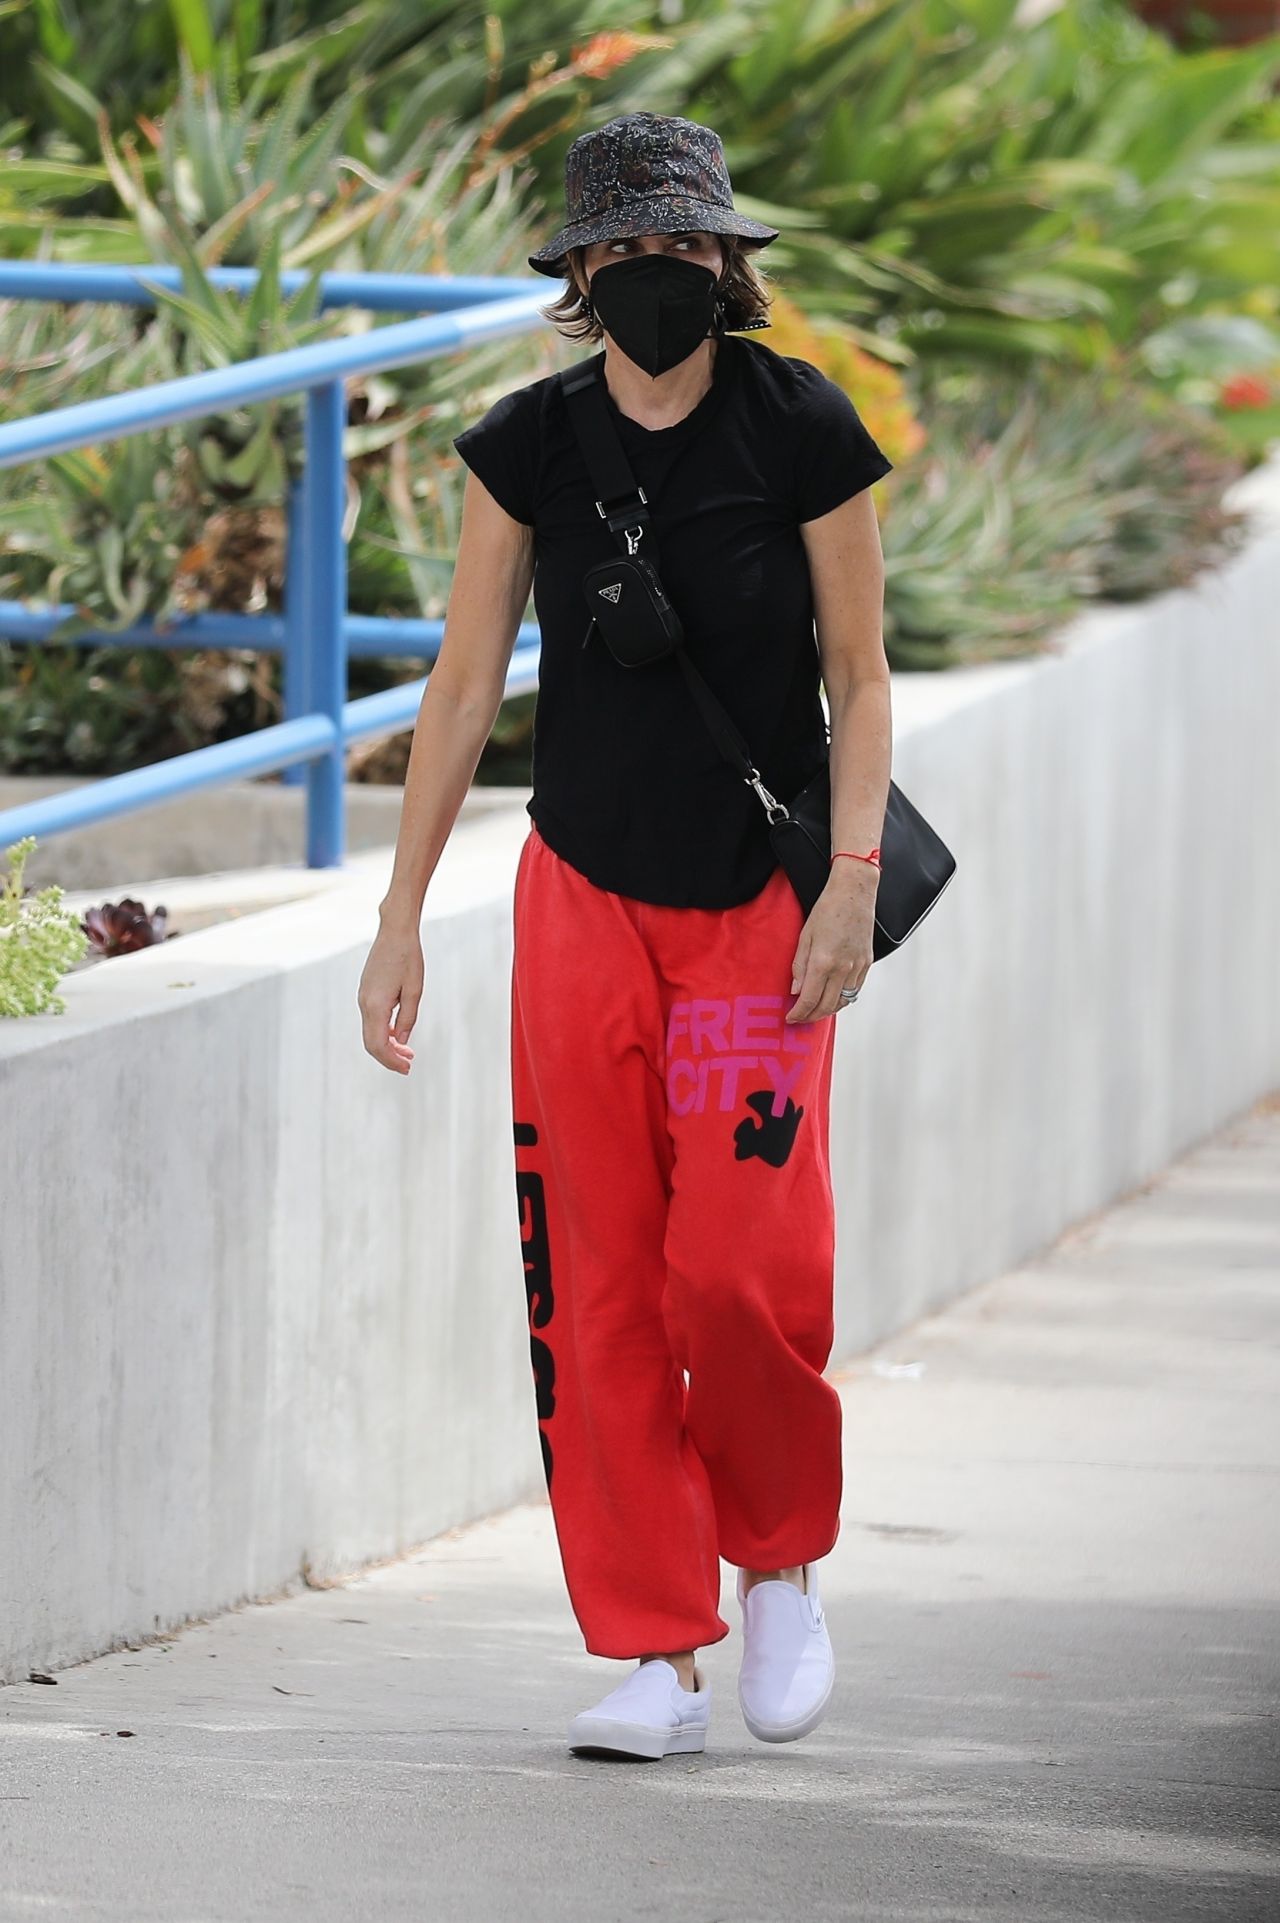 Lisa Rinna ditches the high fashion for sweatpants and trainers as